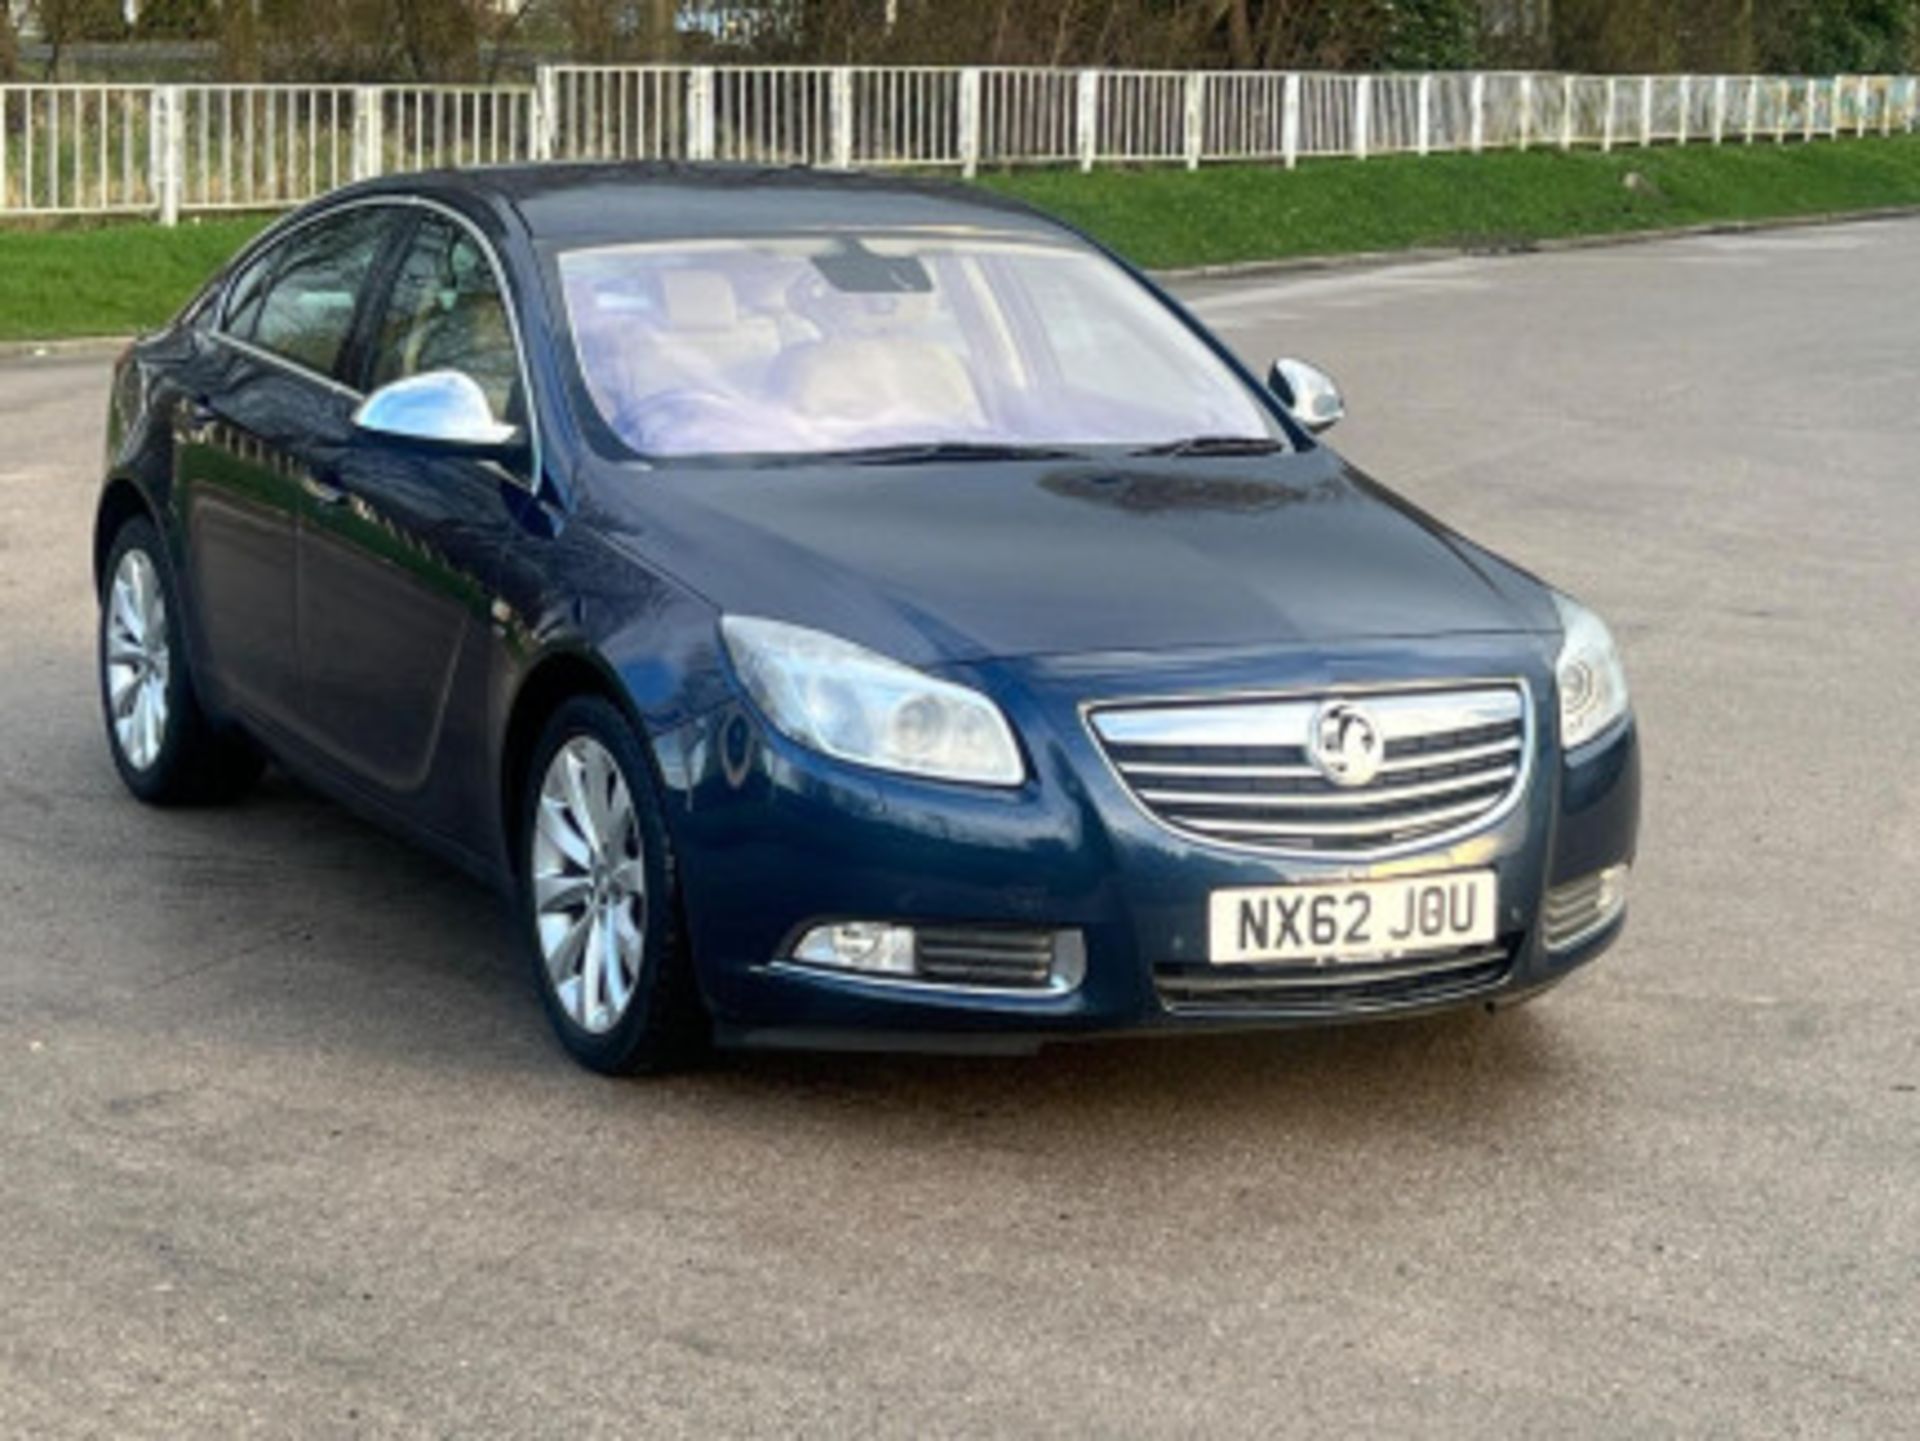 2012 VAUXHALL INSIGNIA 2.0 CDTI ELITE AUTO EURO 5 - DISCOVER EXCELLENCE >>--NO VAT ON HAMMER--<< - Image 50 of 120